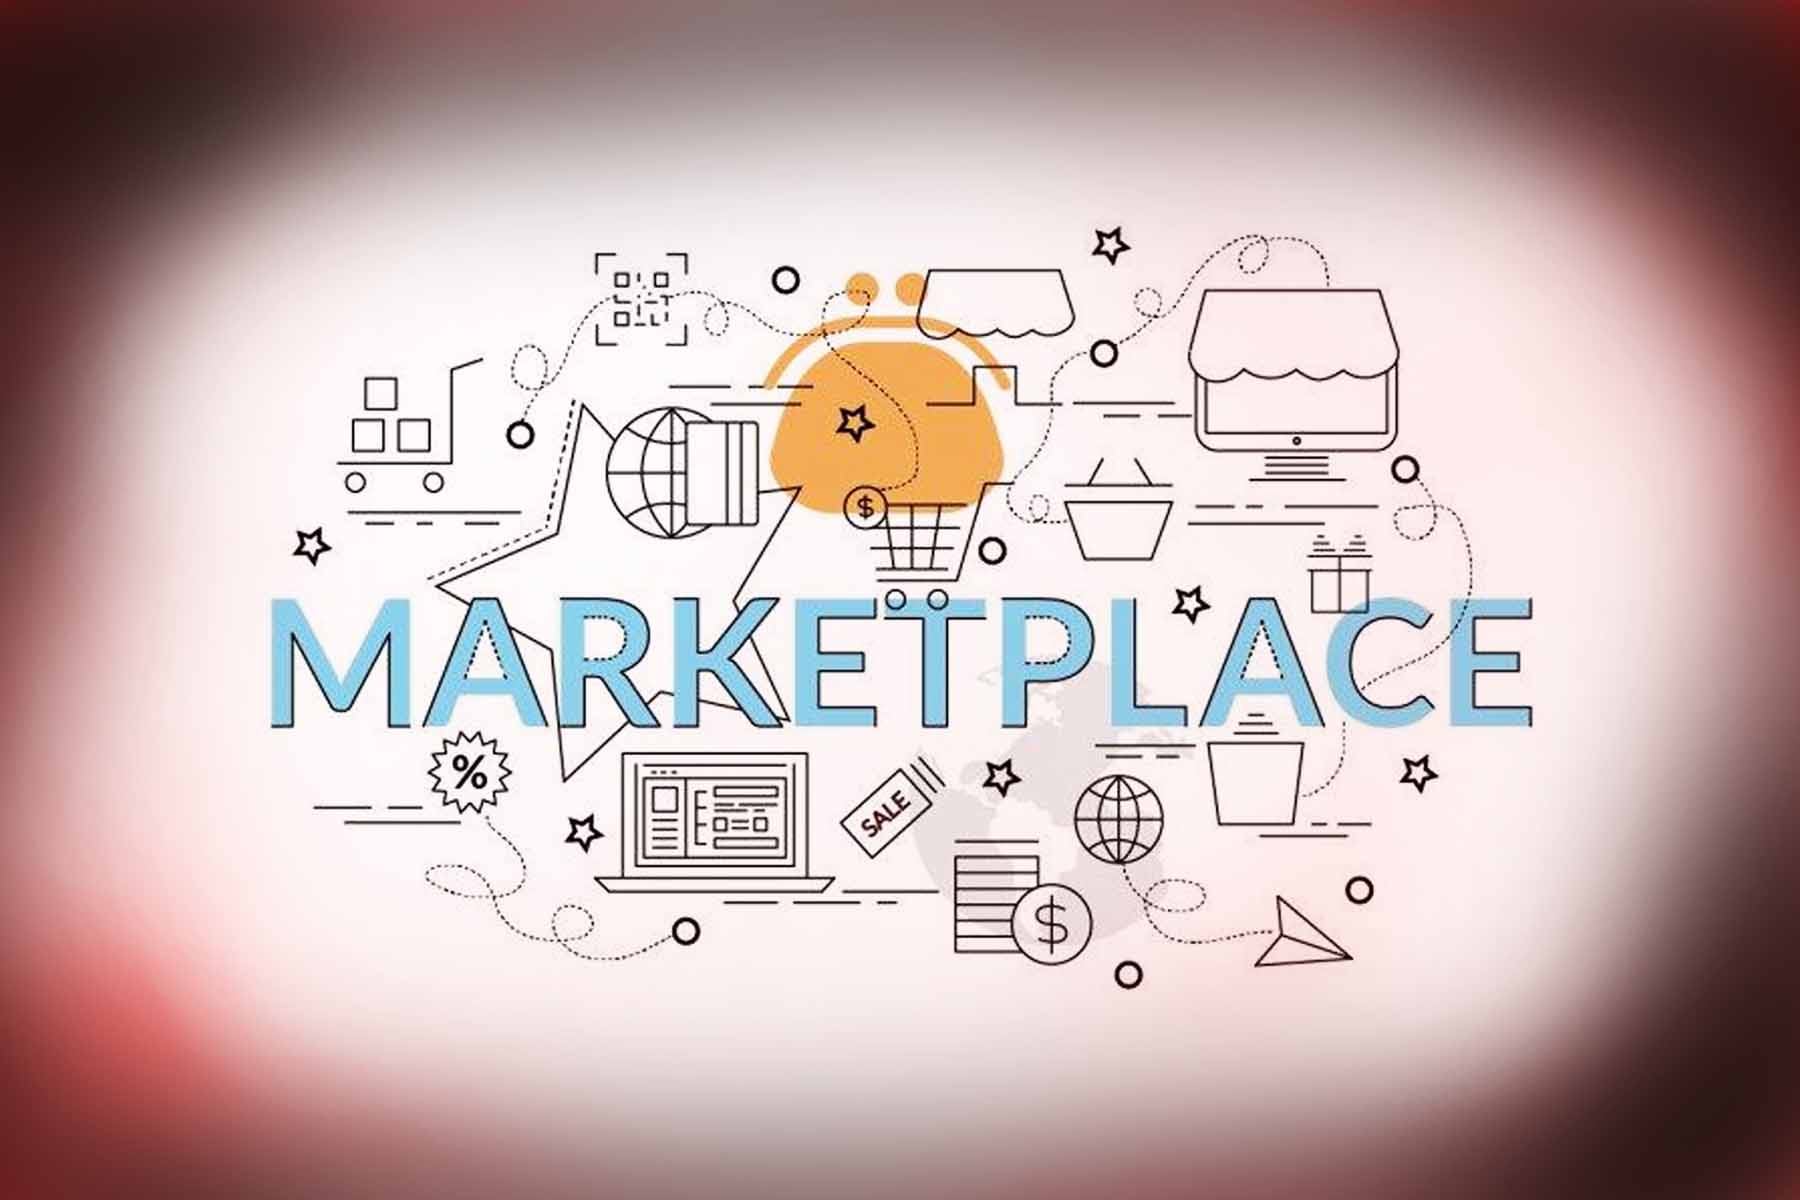 Top 10 Marketplaces in Indonesia